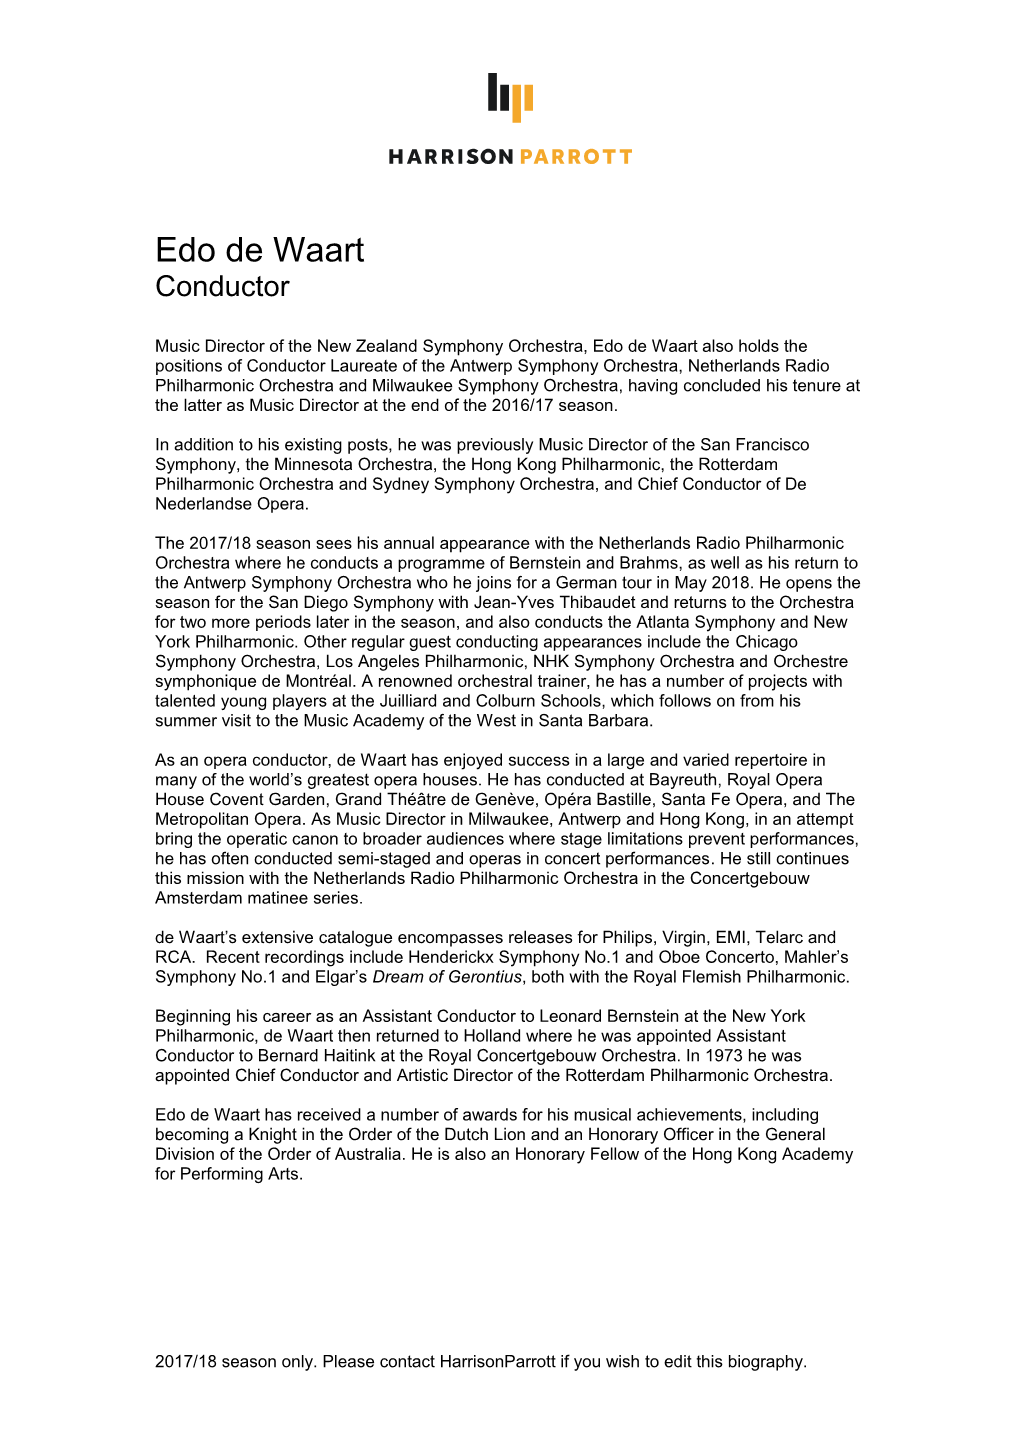 Music Director of the New Zealand Symphony Orchestra, Edo De Waart Also Holds the Positions